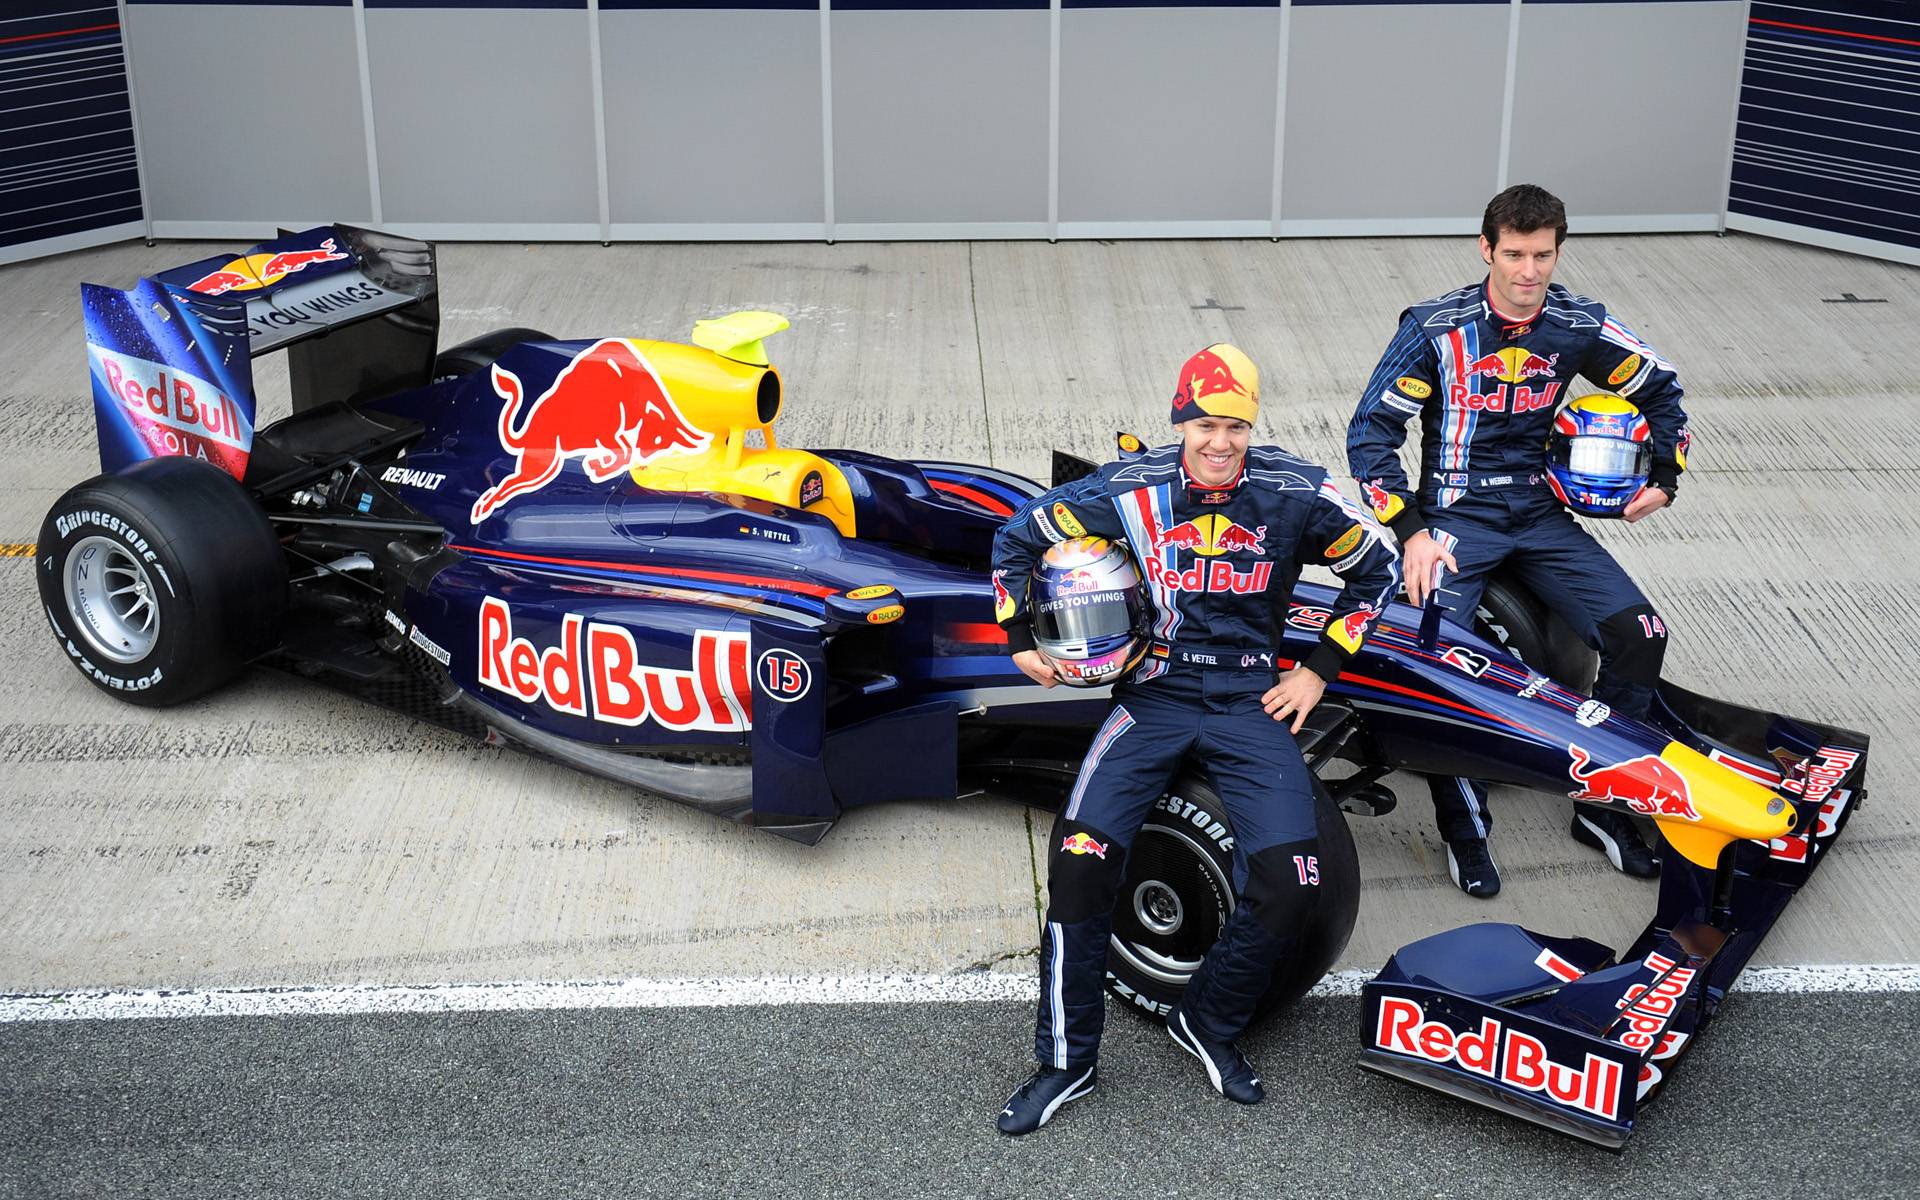 Well Managed HPC Critical To Infiniti Red Bull's Formula One Racing